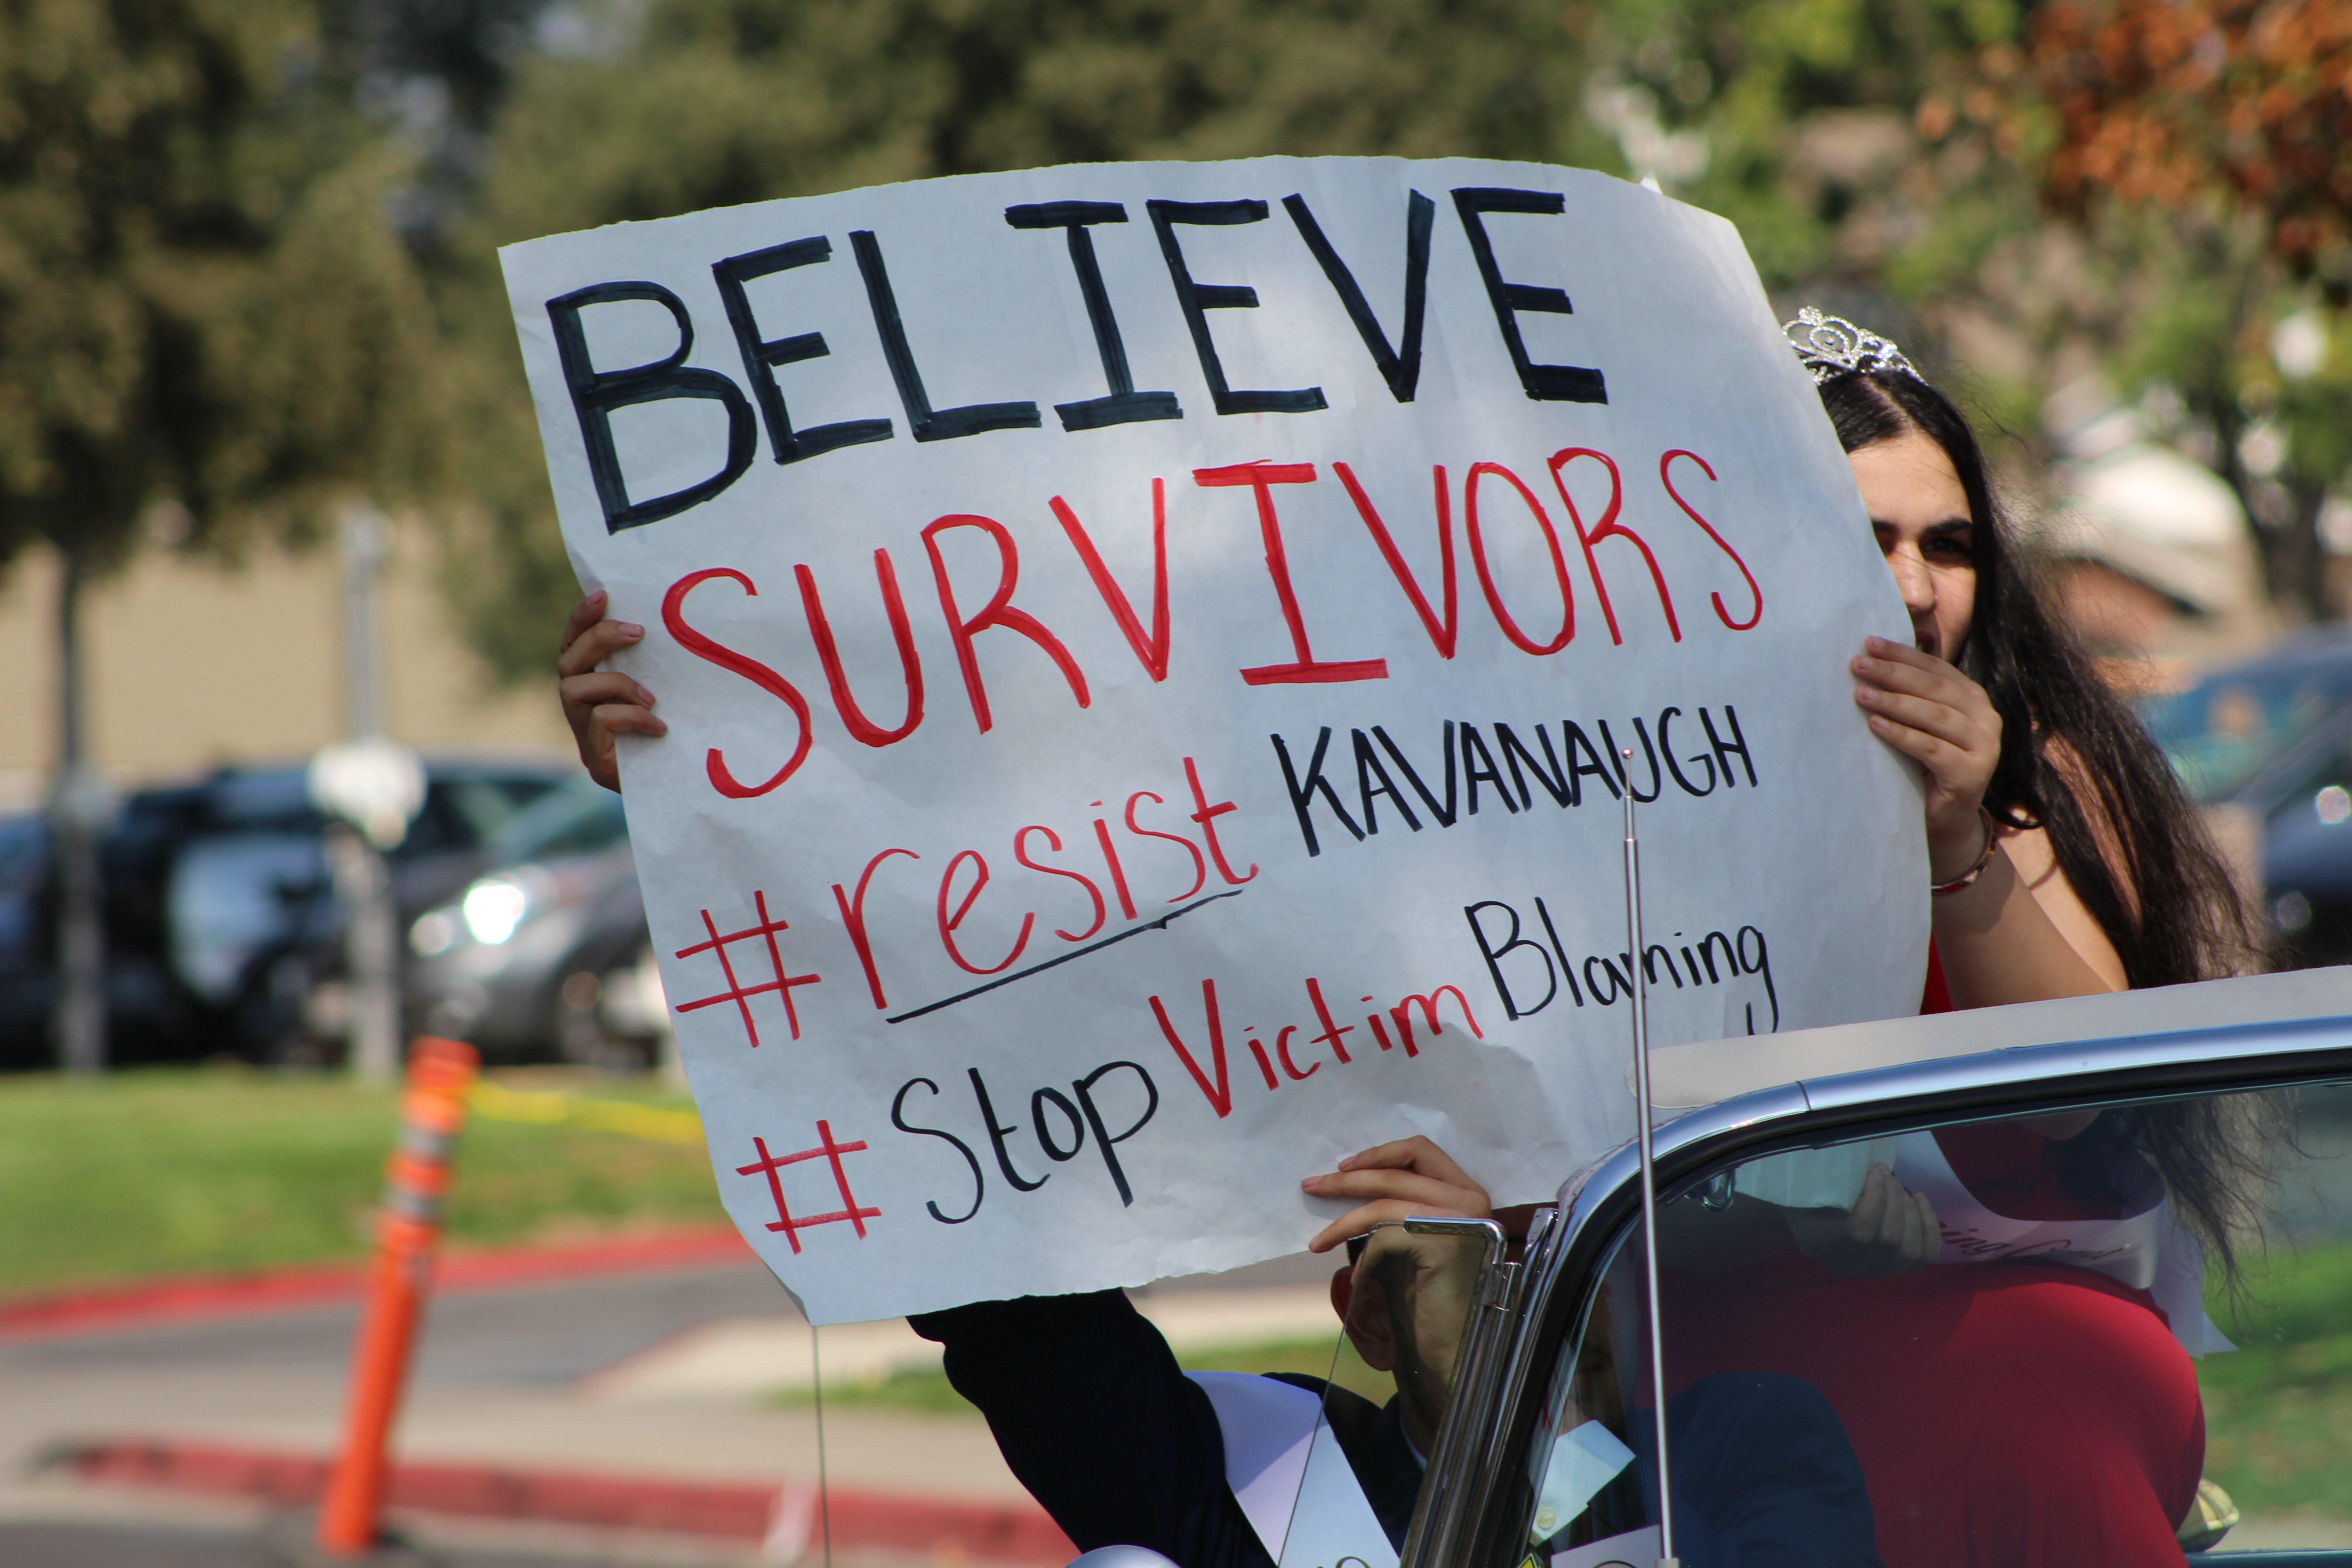 Marco Torres holds poster that reads "Believe Survivors" inside the car during the homecoming procession. Photo by Nisha Malley.